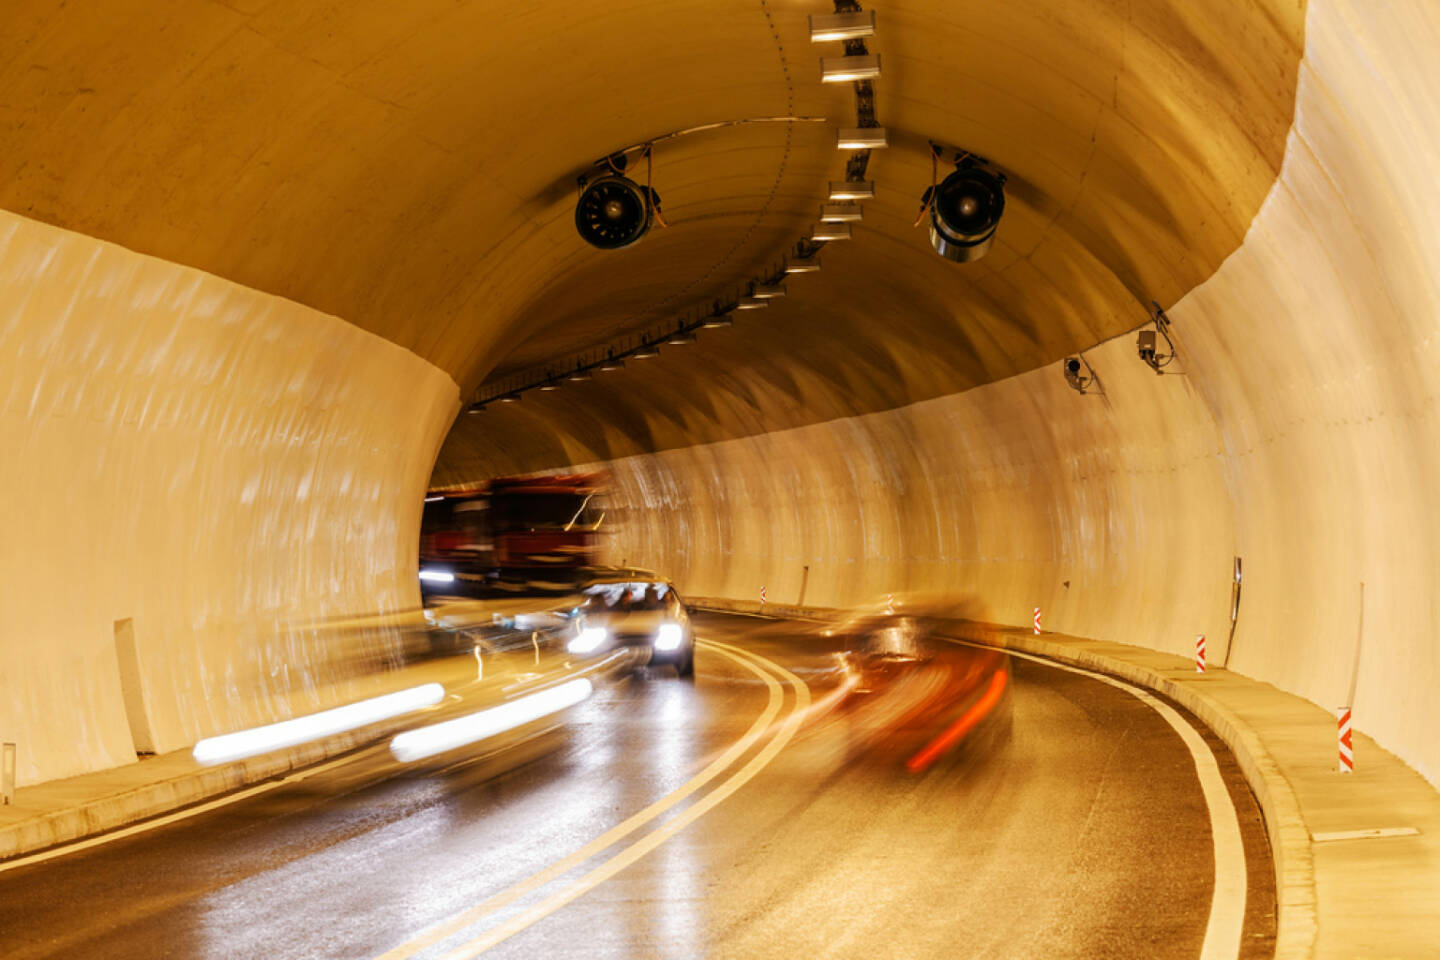 Tunnel, Autobahn, Auto, Fahrzeug, Tunnelblick, Straße, http://www.shutterstock.com/de/pic-193494665/stock-photo-tunnel-with-lights-and-moving-cars.html? 